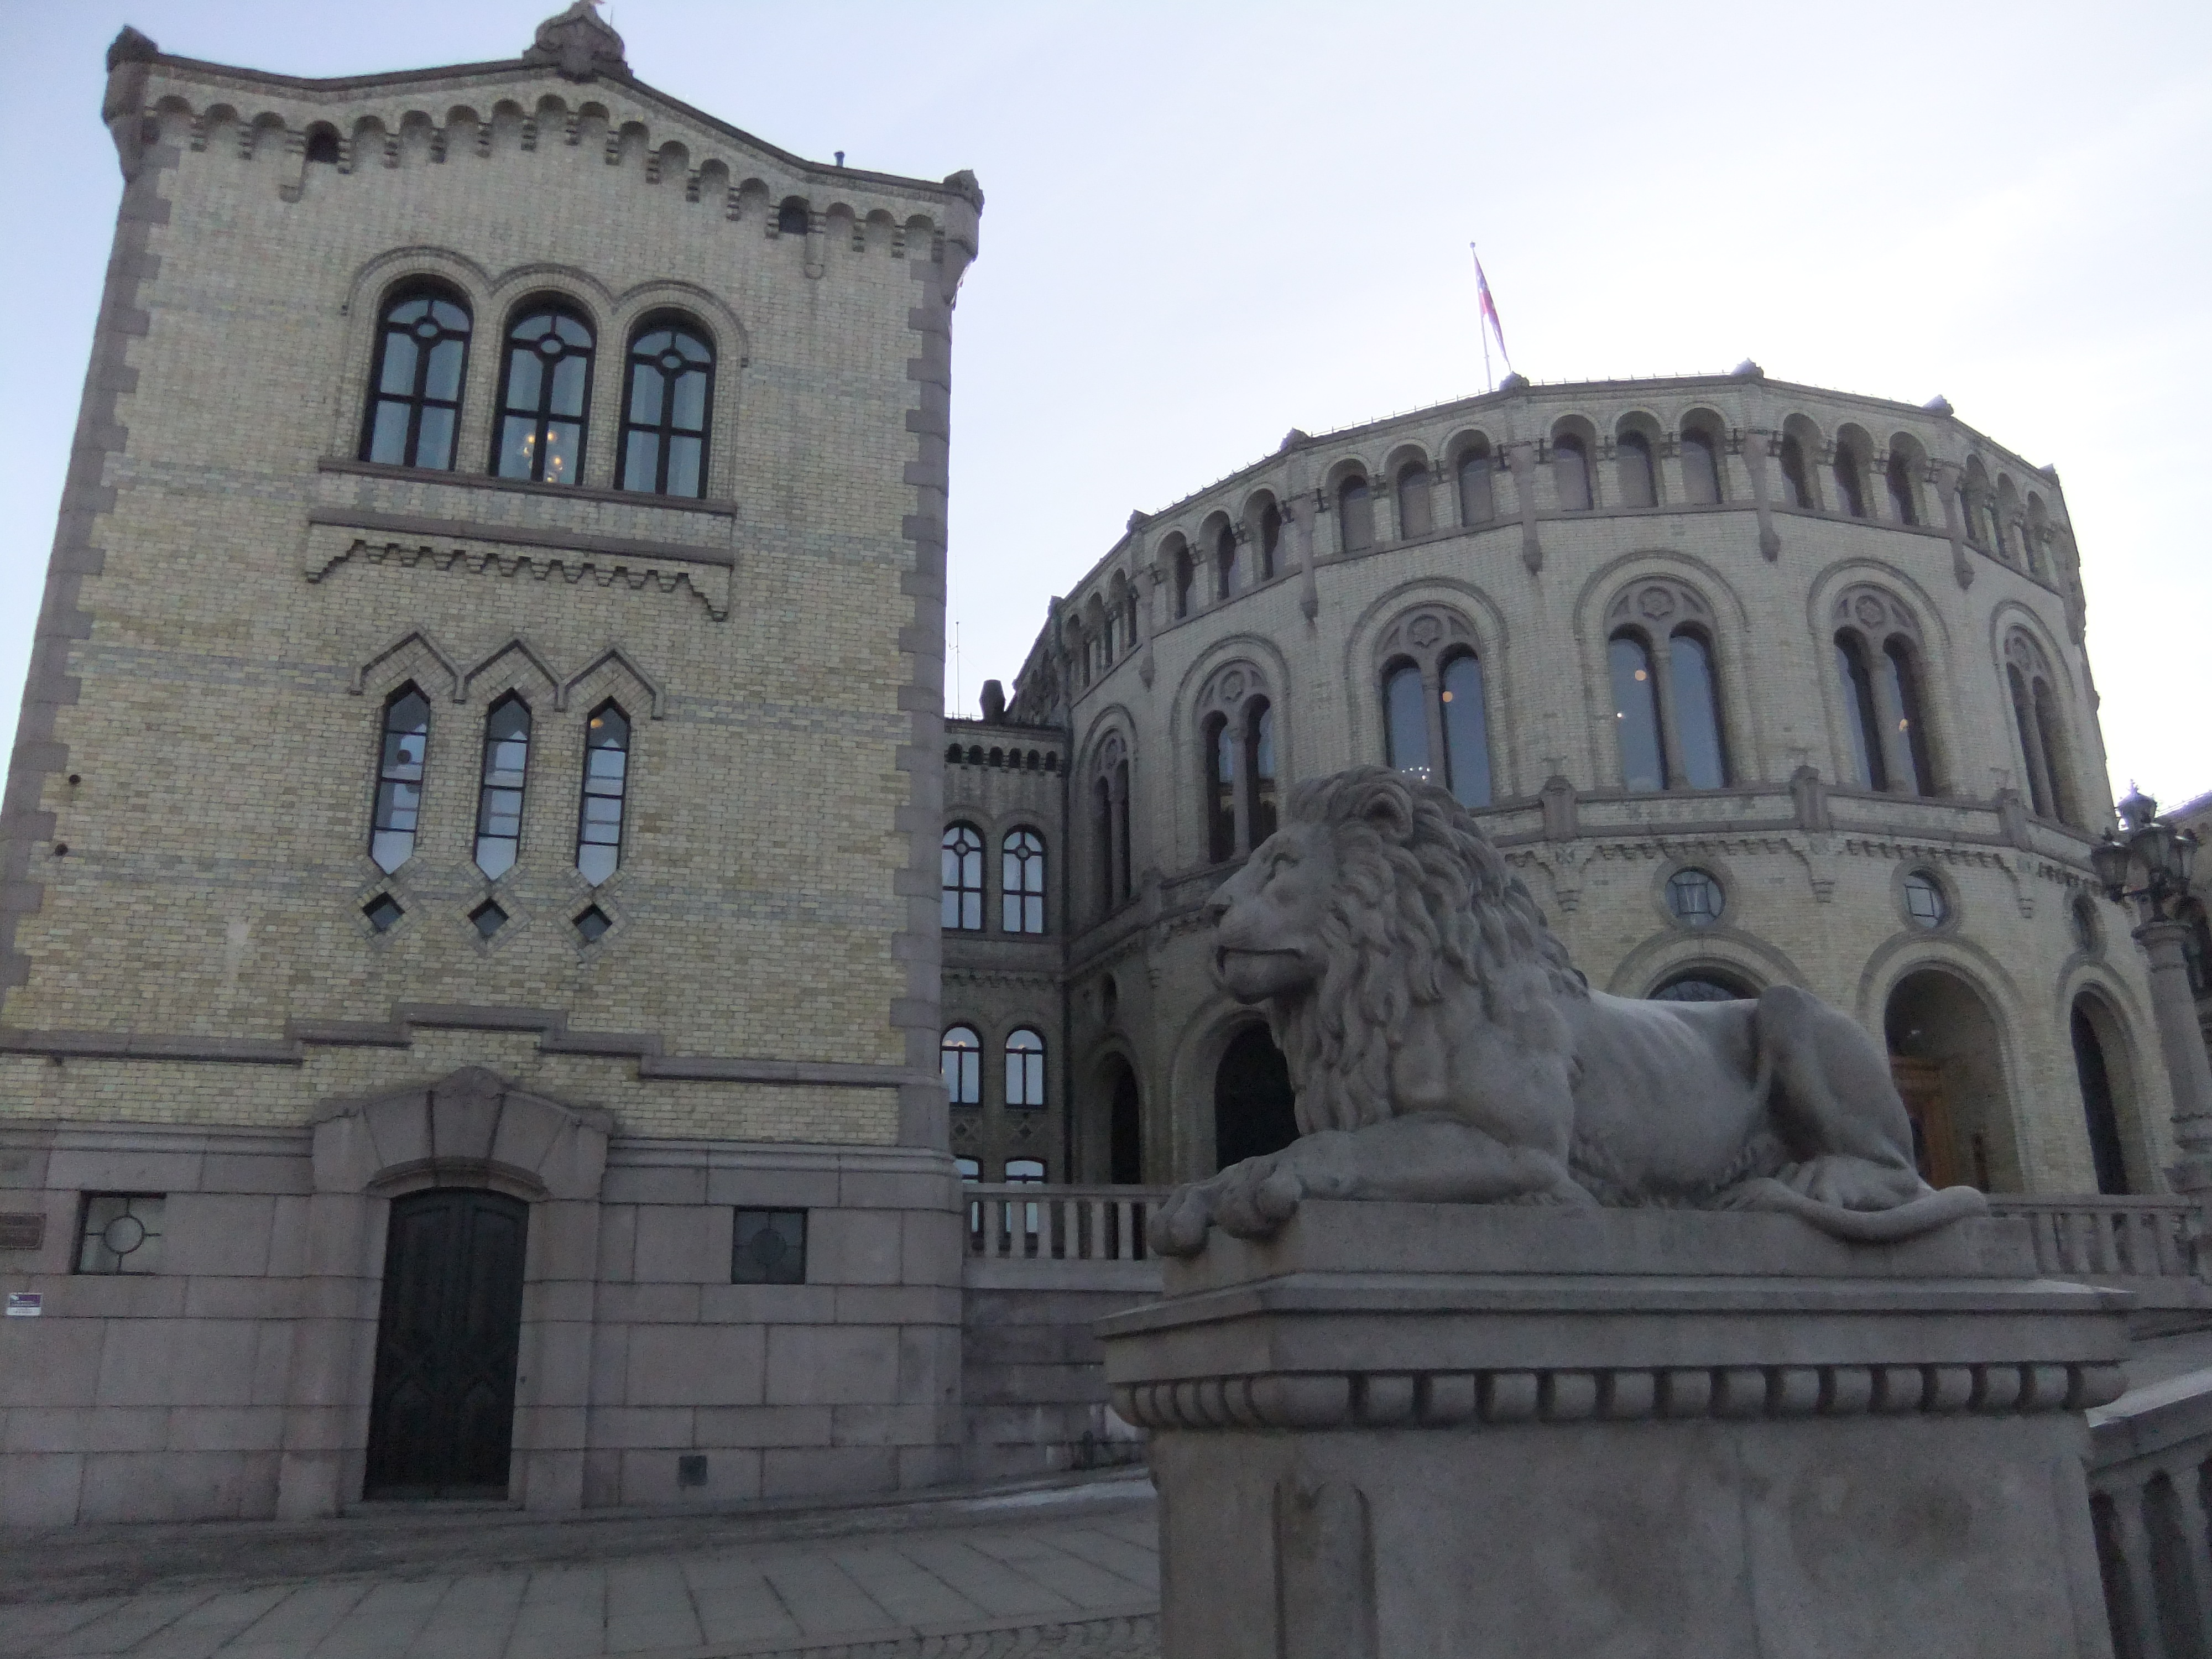 Parliament of Norway, Oslo